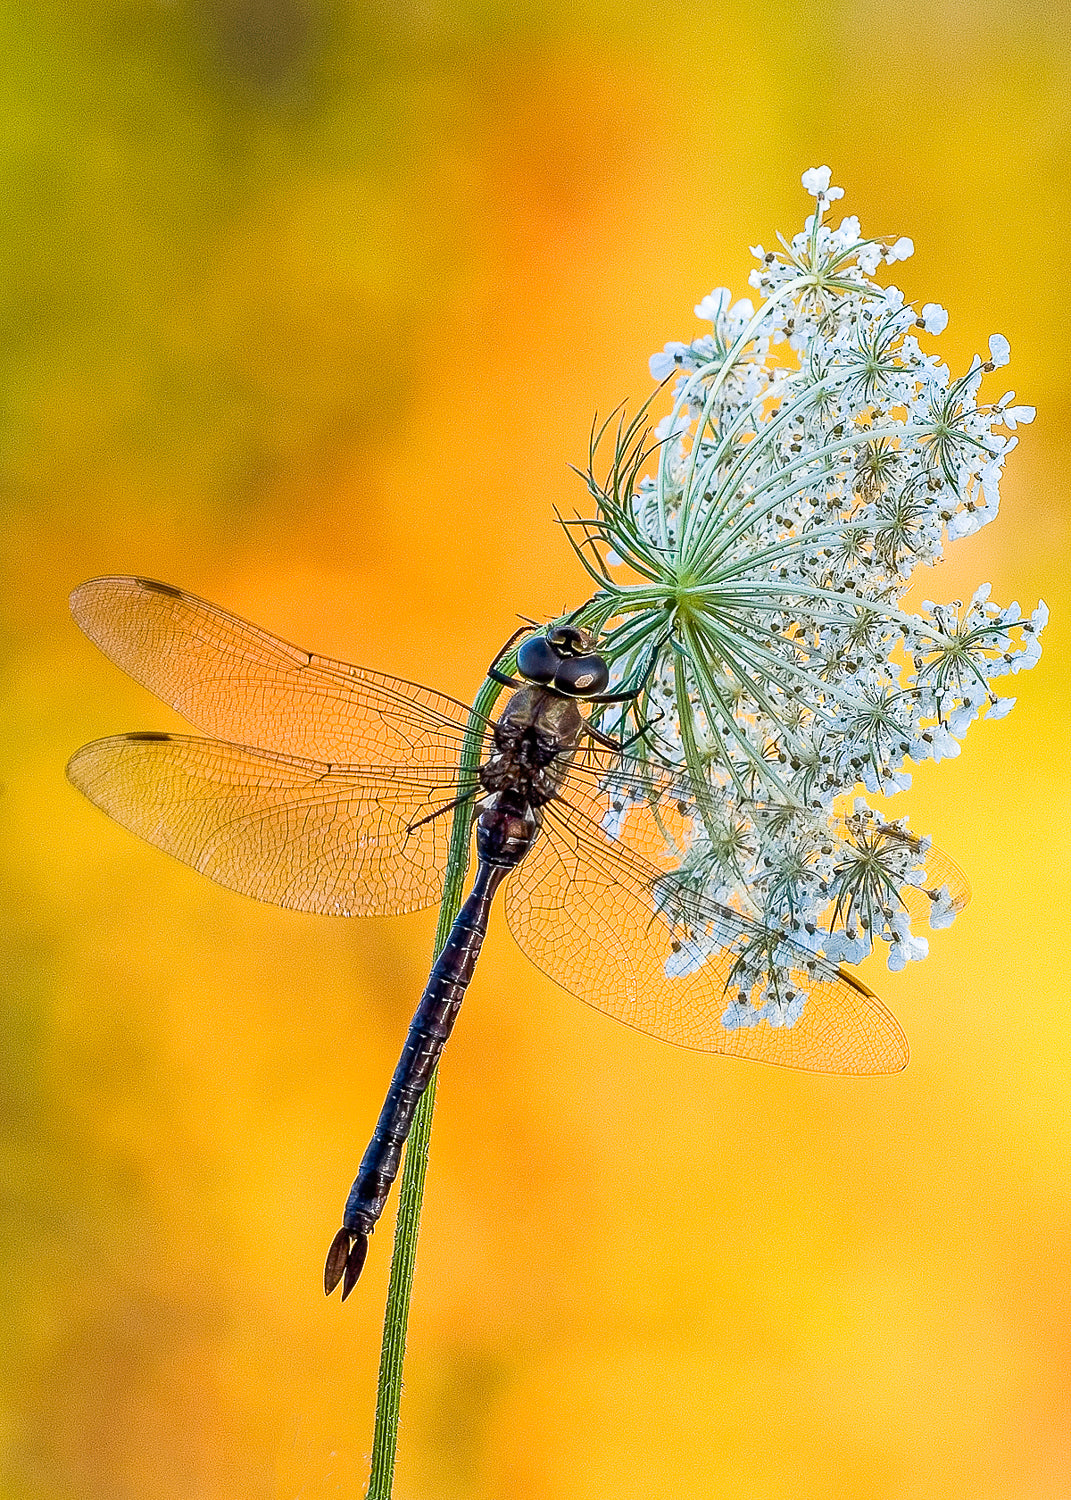 Dragonfly on Queen Anne's Lace